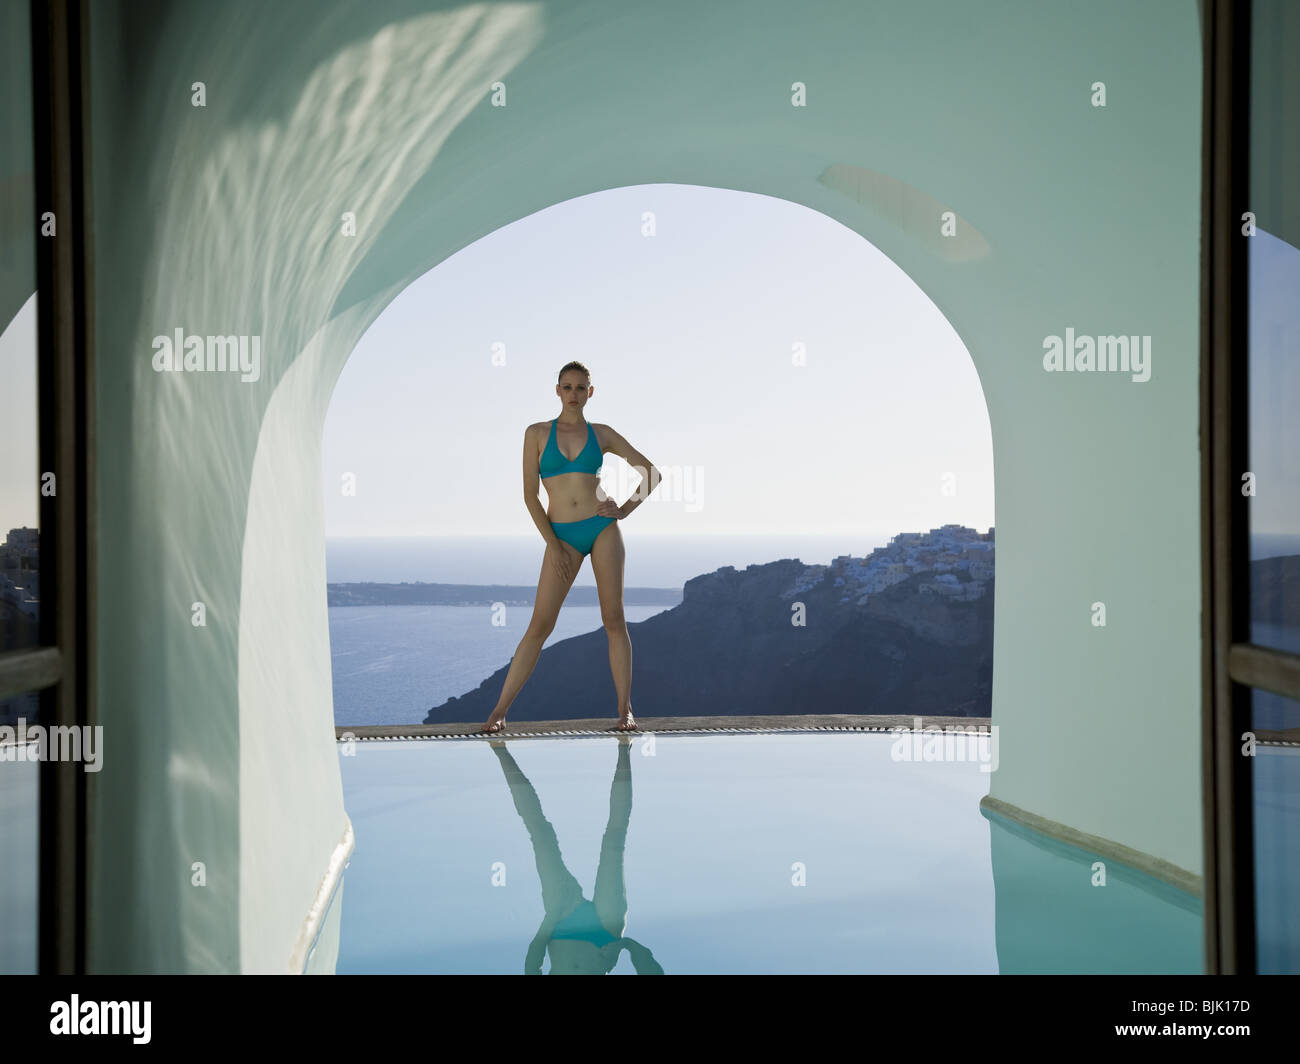 Woman in bikini standing at edge of infinity pool with arch and rock formation Stock Photo